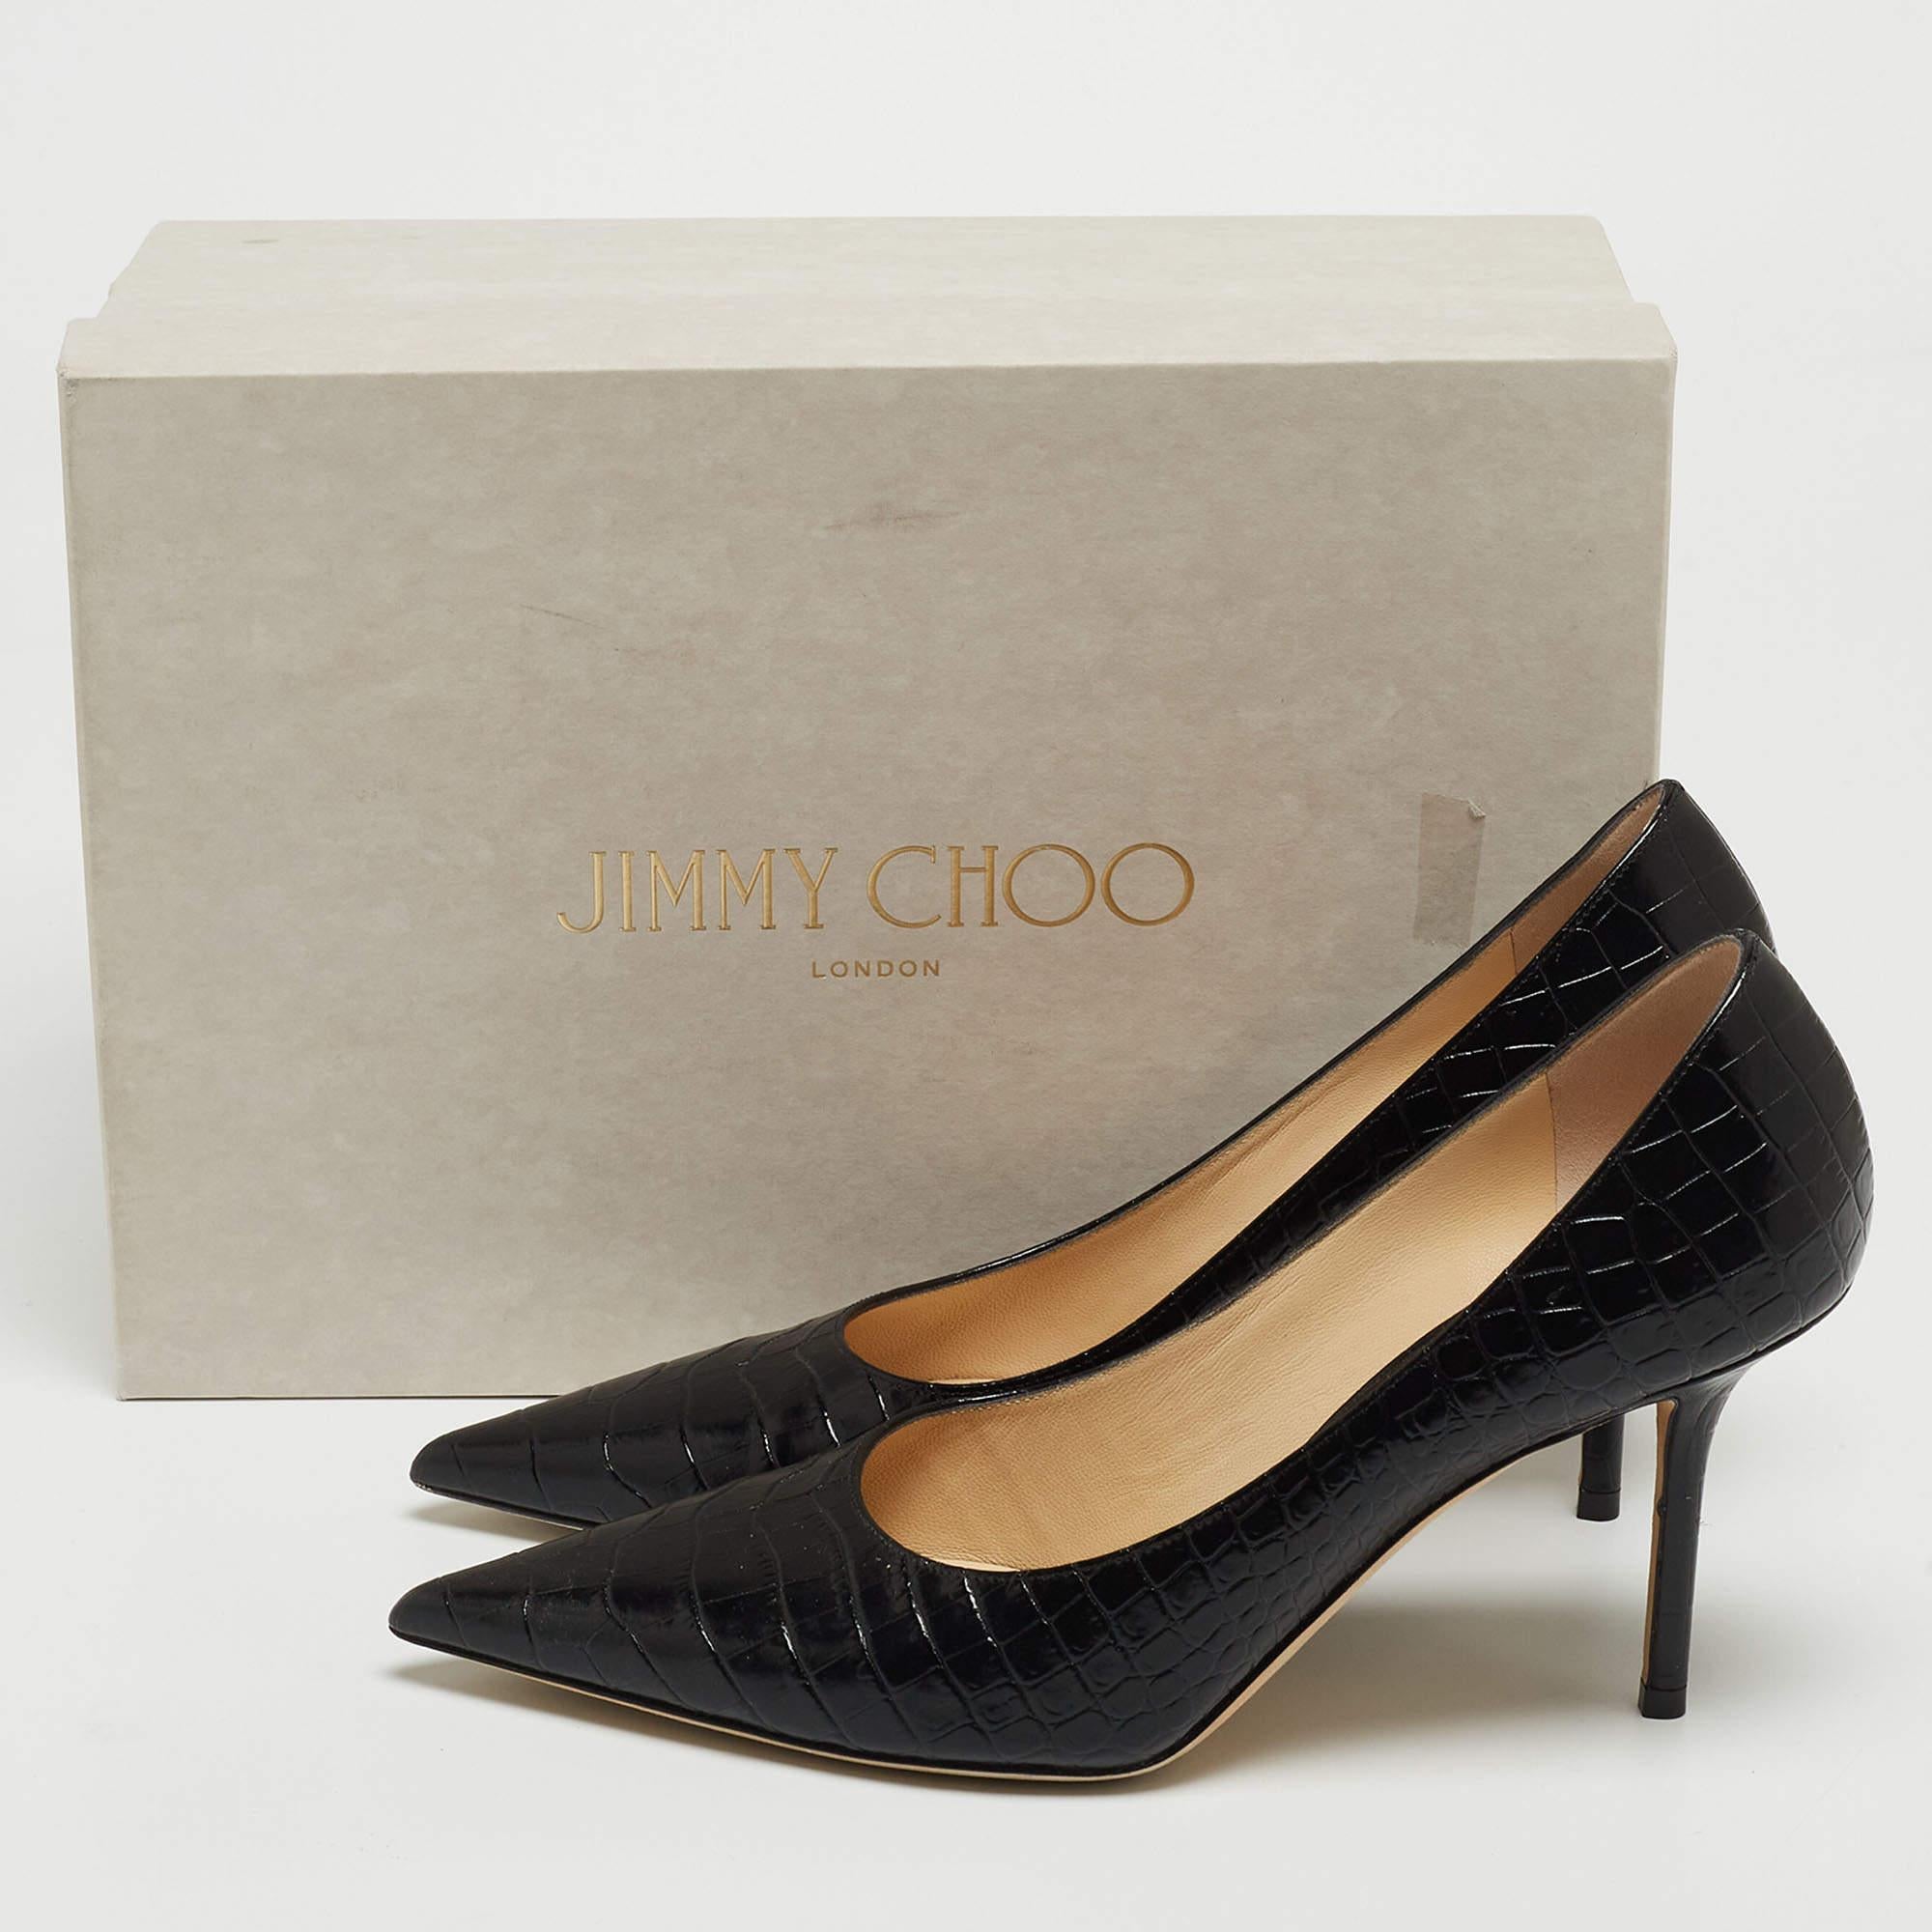 Jimmy Choo Black Croc Embossed Leather Love 85 Pointed Toe Pumps Size 39.5 5